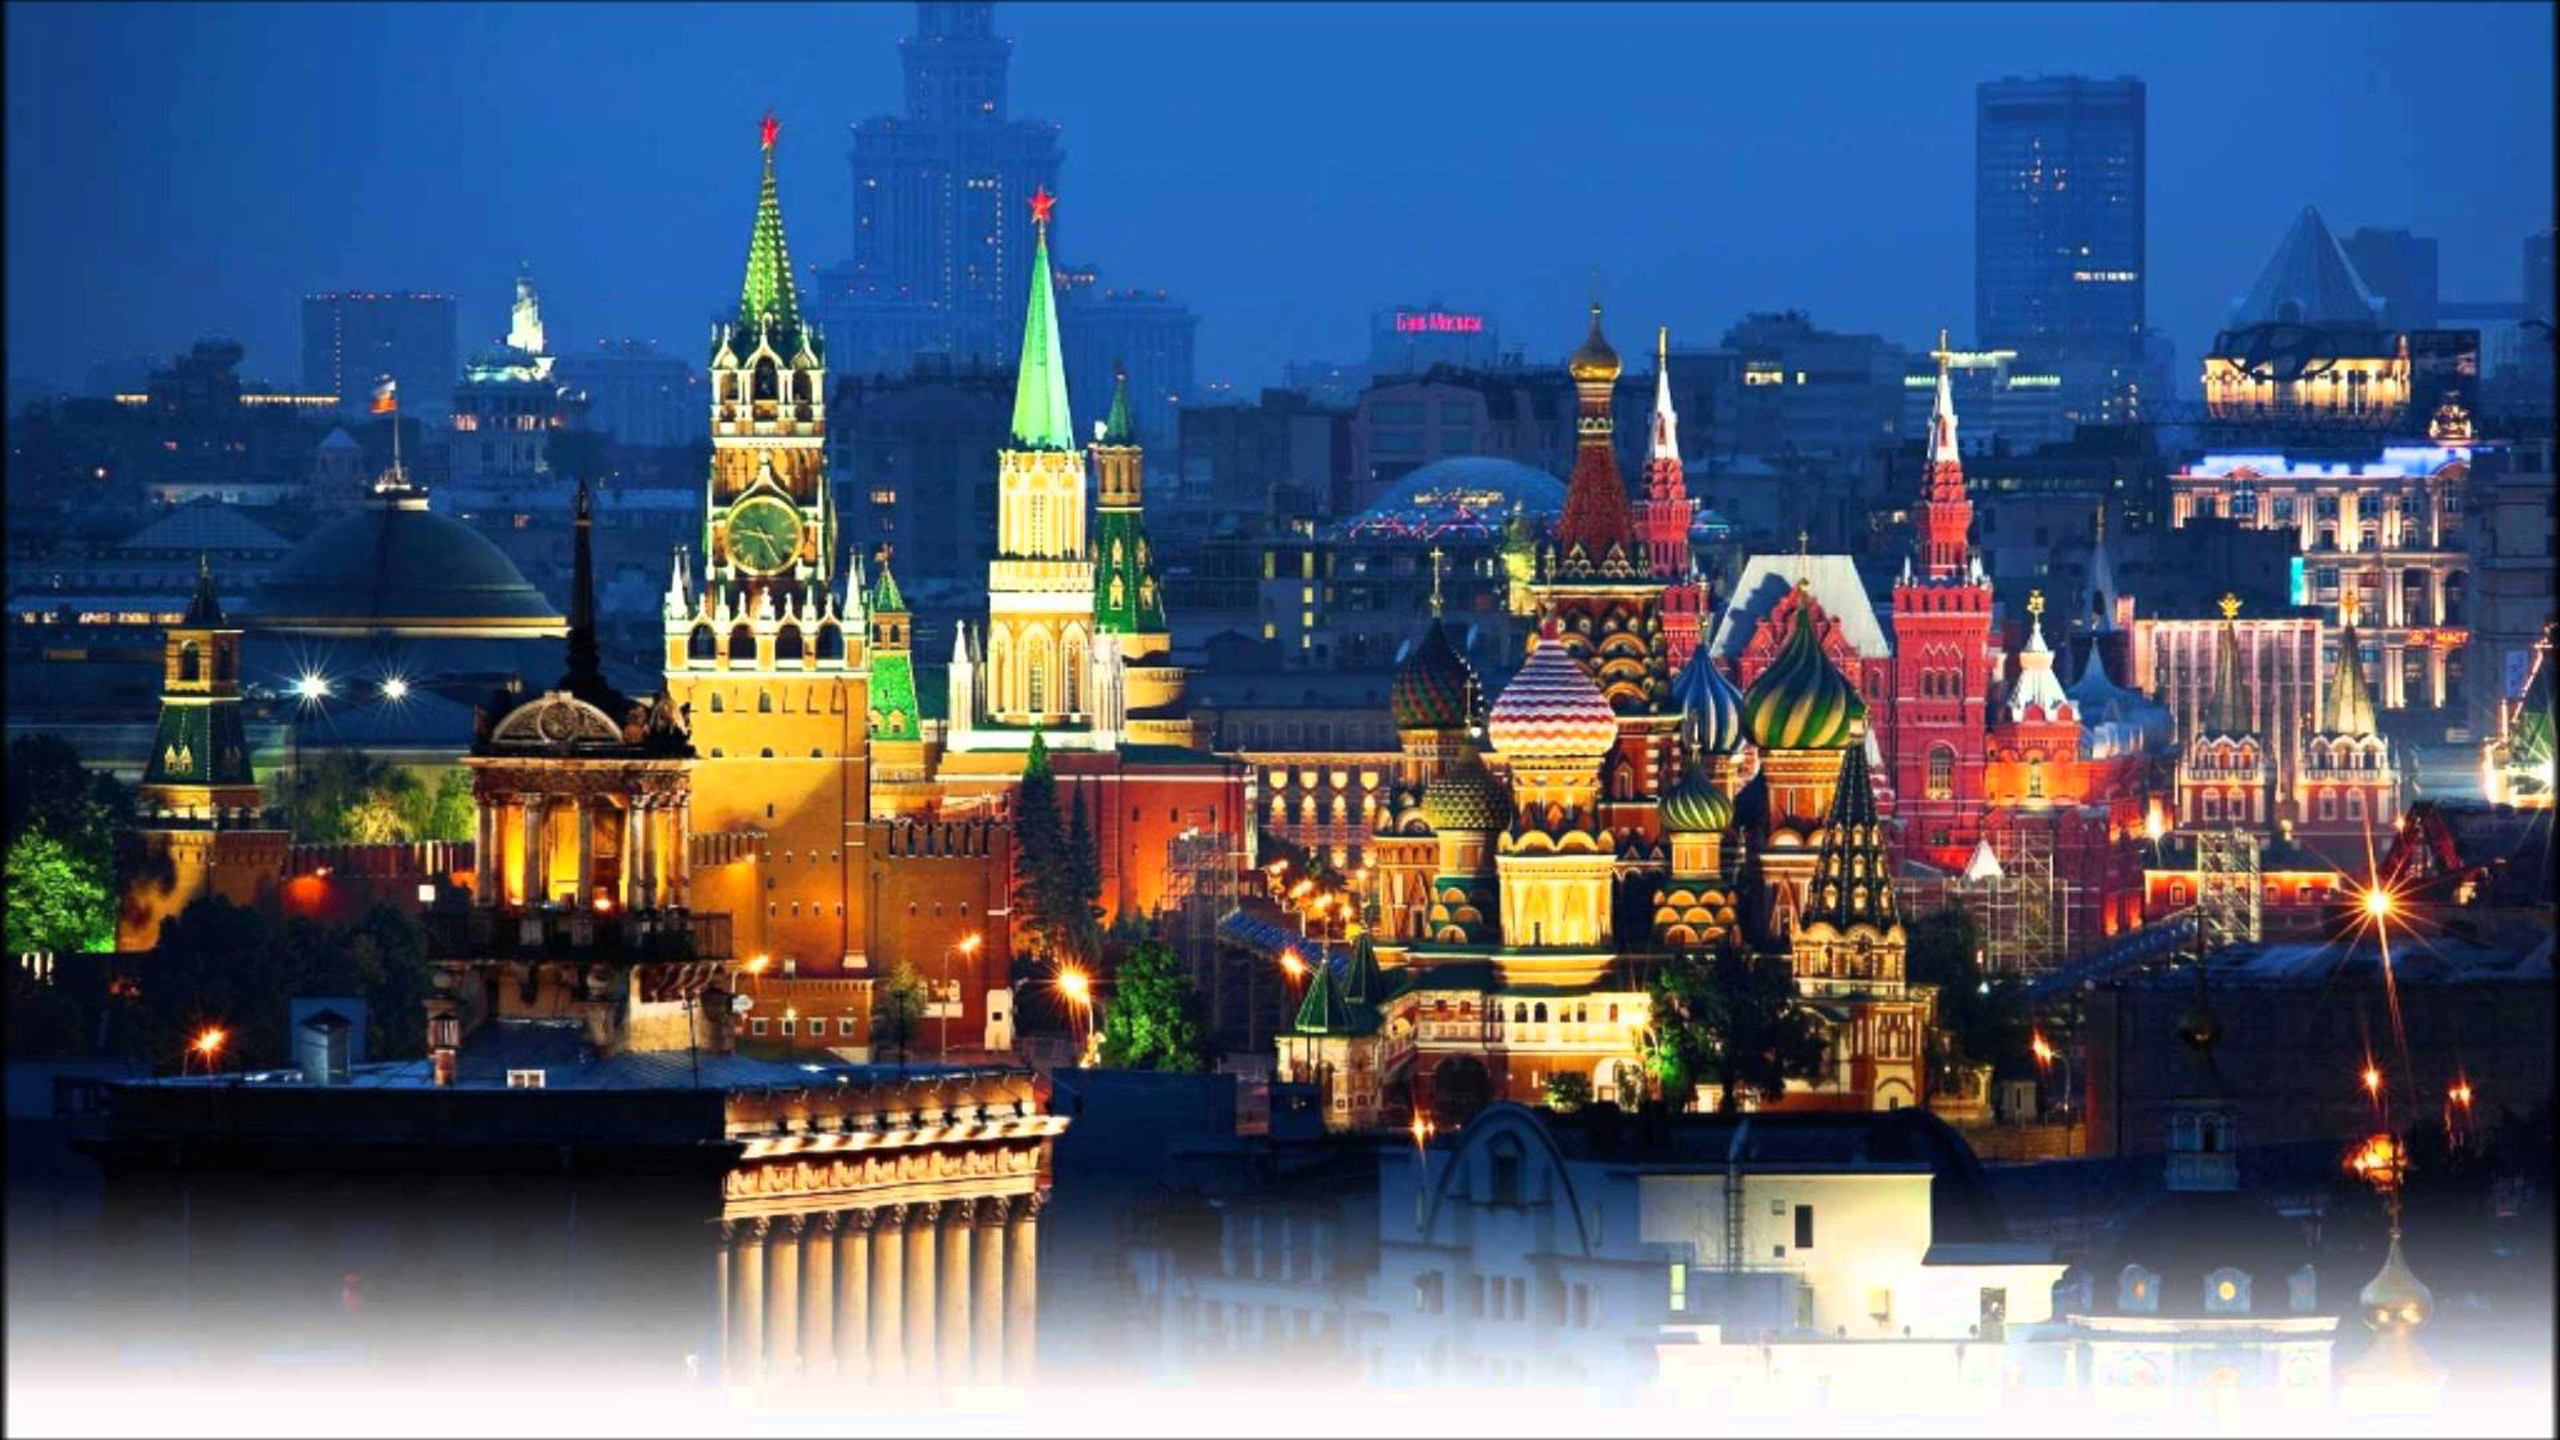 Moscow At Night Wallpapers - Wallpaper Cave